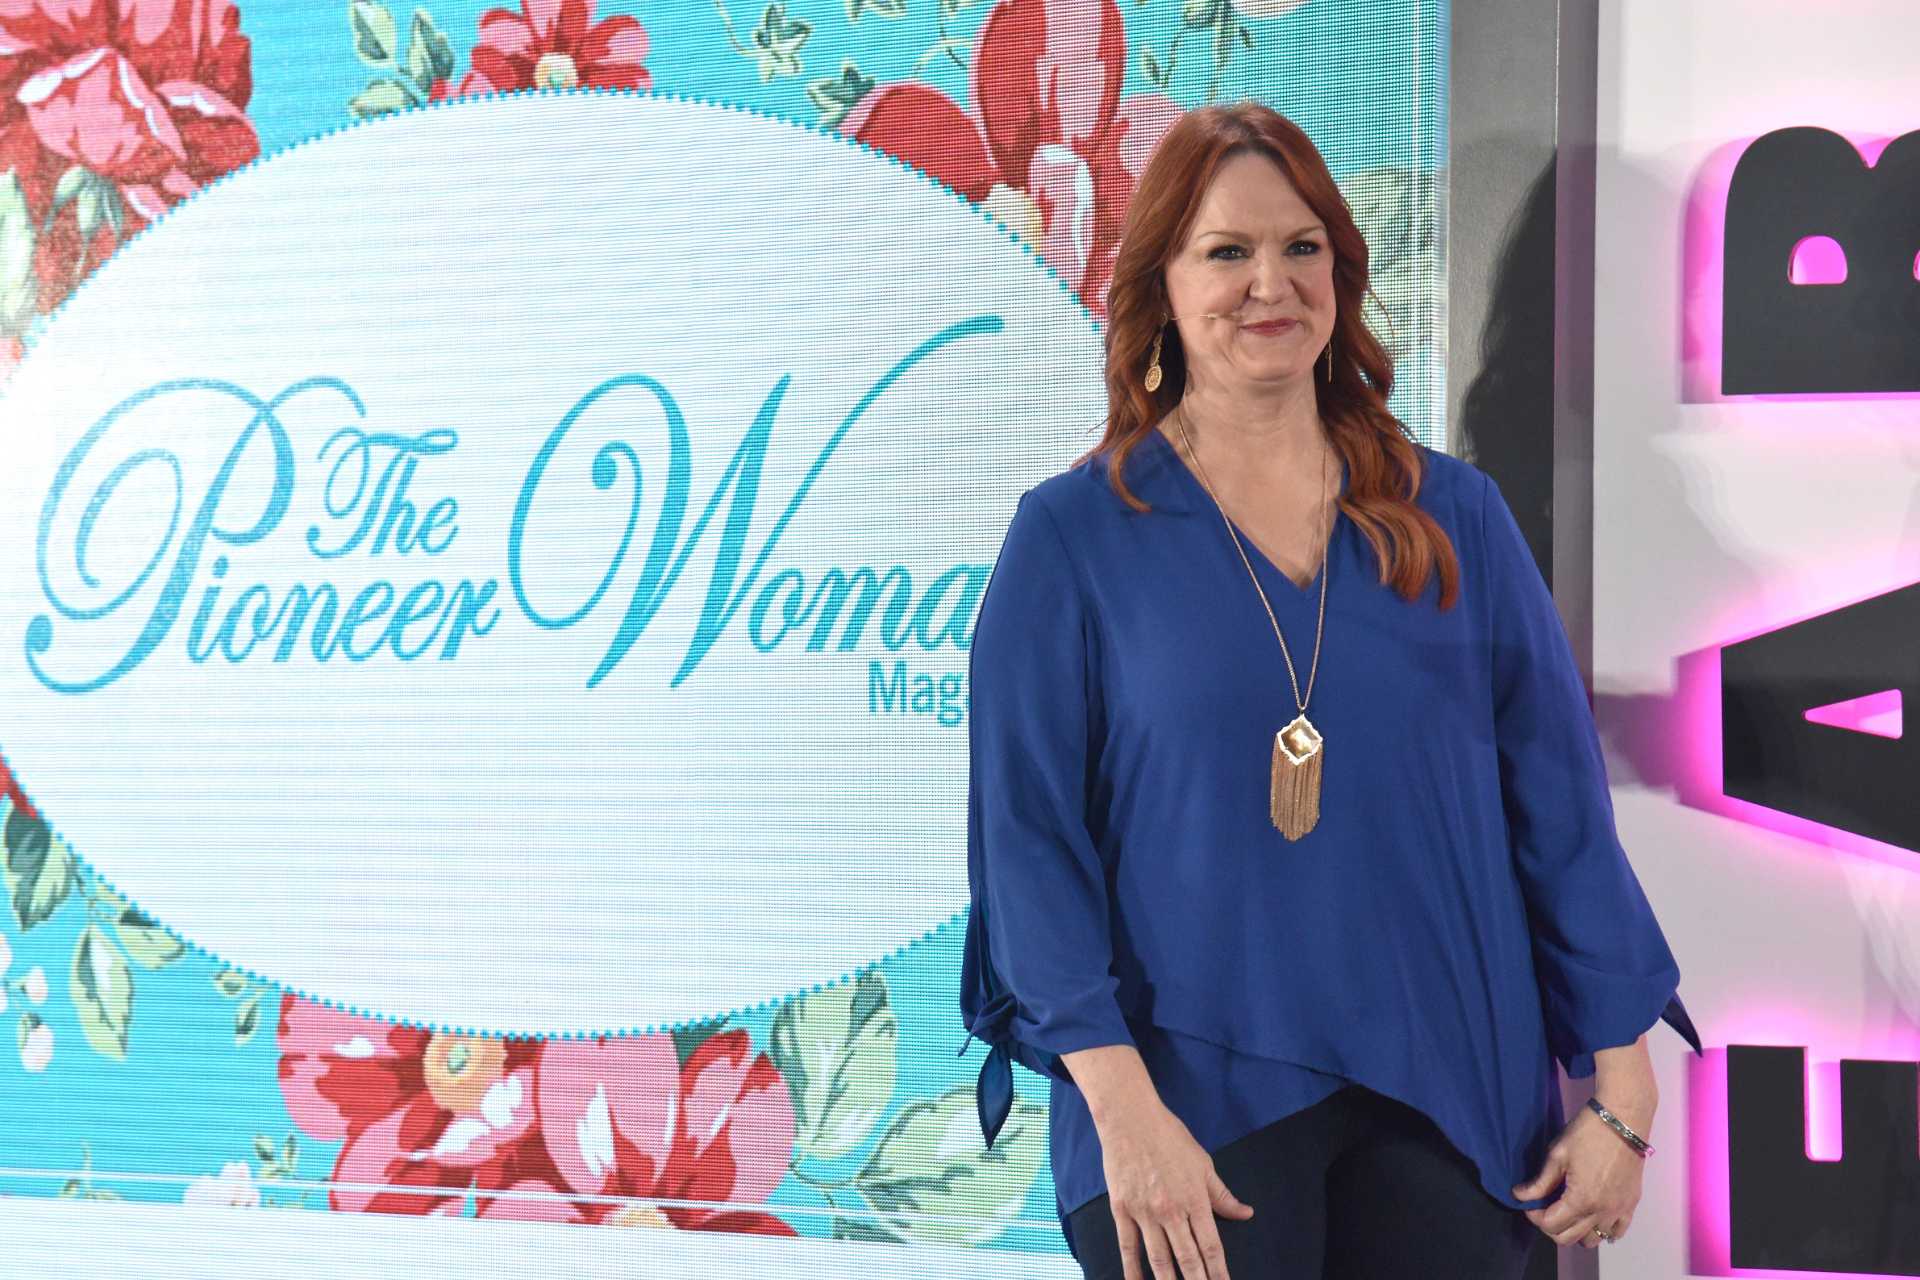 The Pioneer Woman star Ree Drummond | Bryan Bedder/Getty Images for Hearst